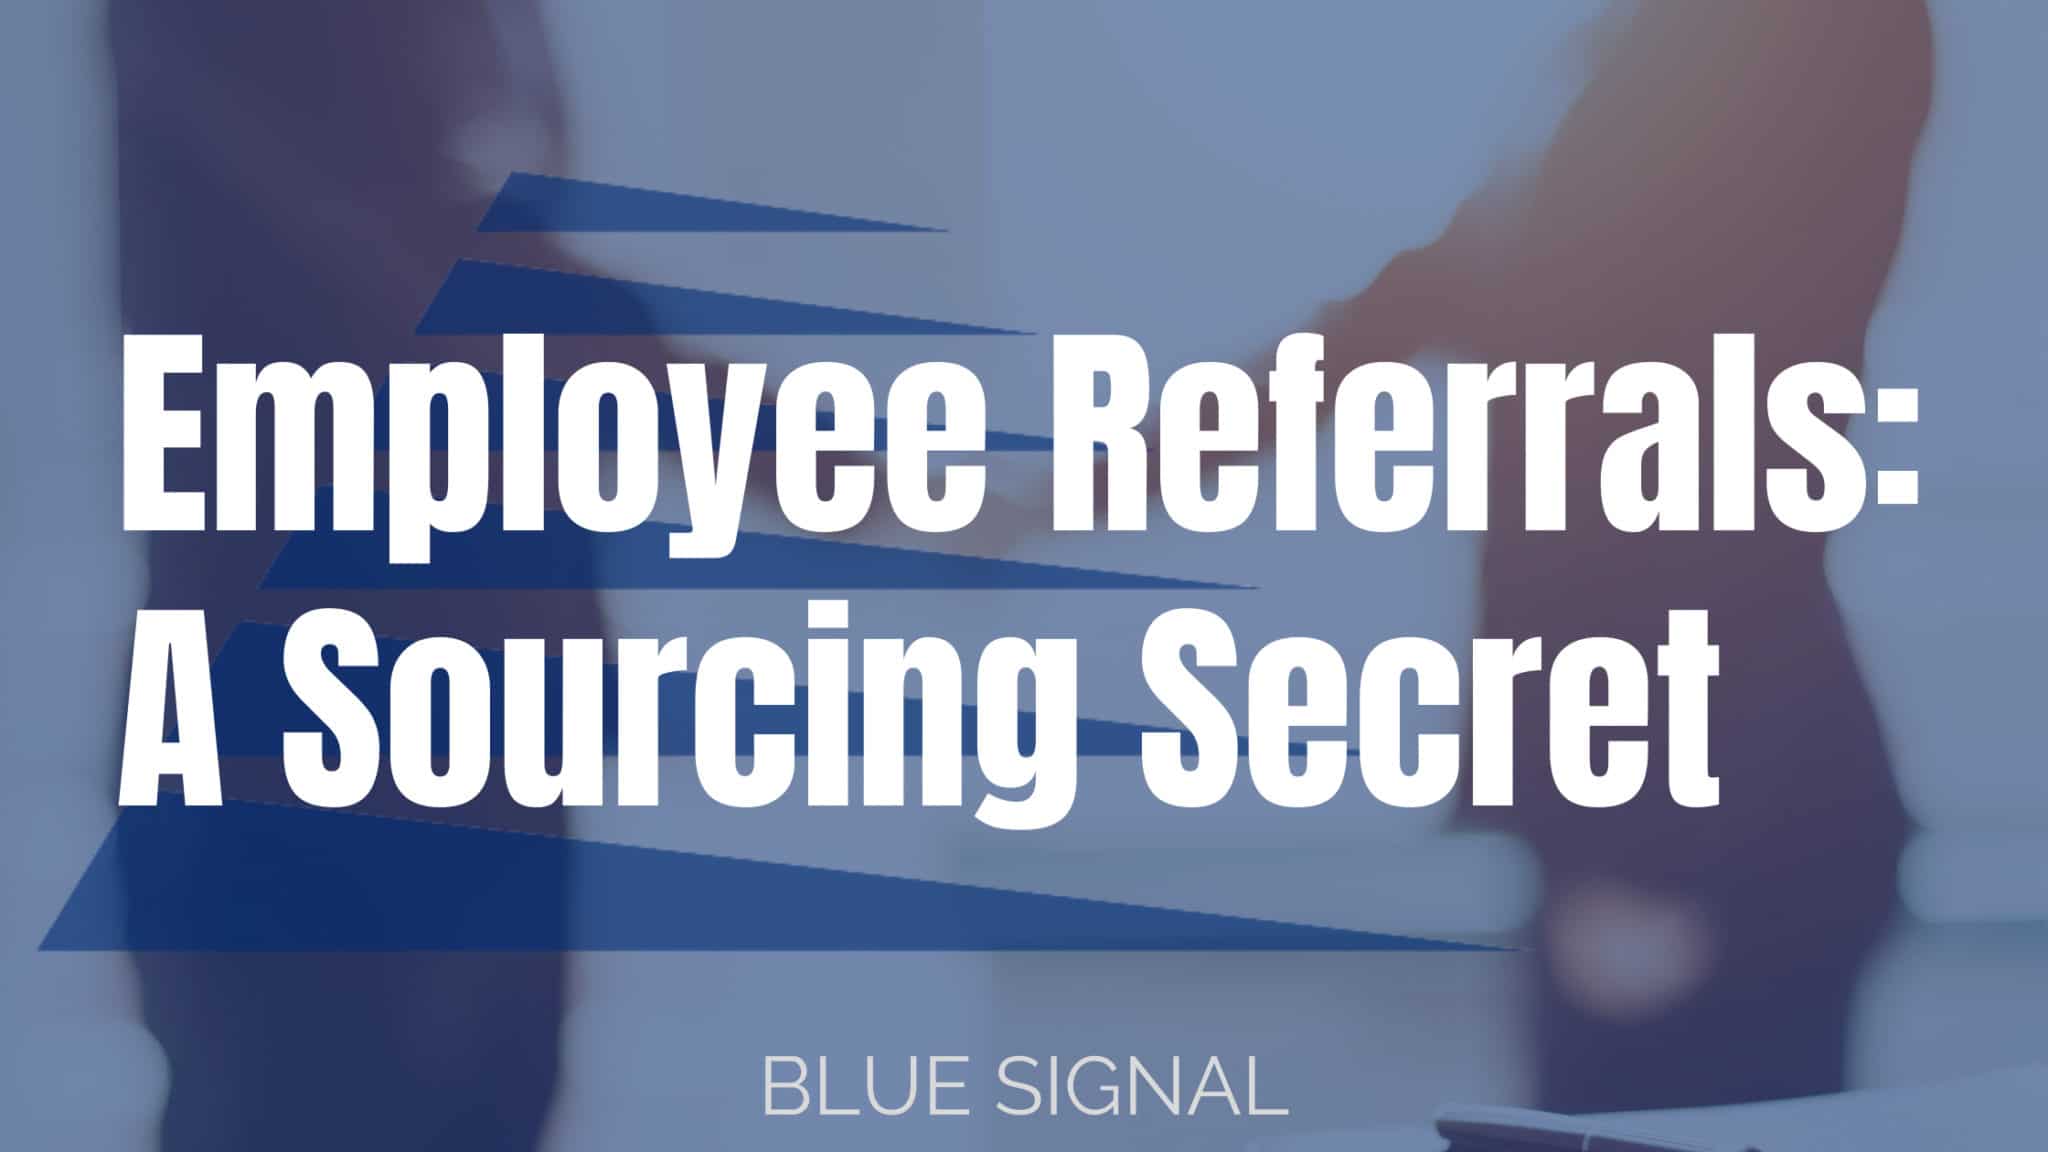 Blue Signal Search, a top recruiting firm, logo on top of a photo of two people shaking hands. Text that reads "Employee Referrals: A Sourcing Secret"